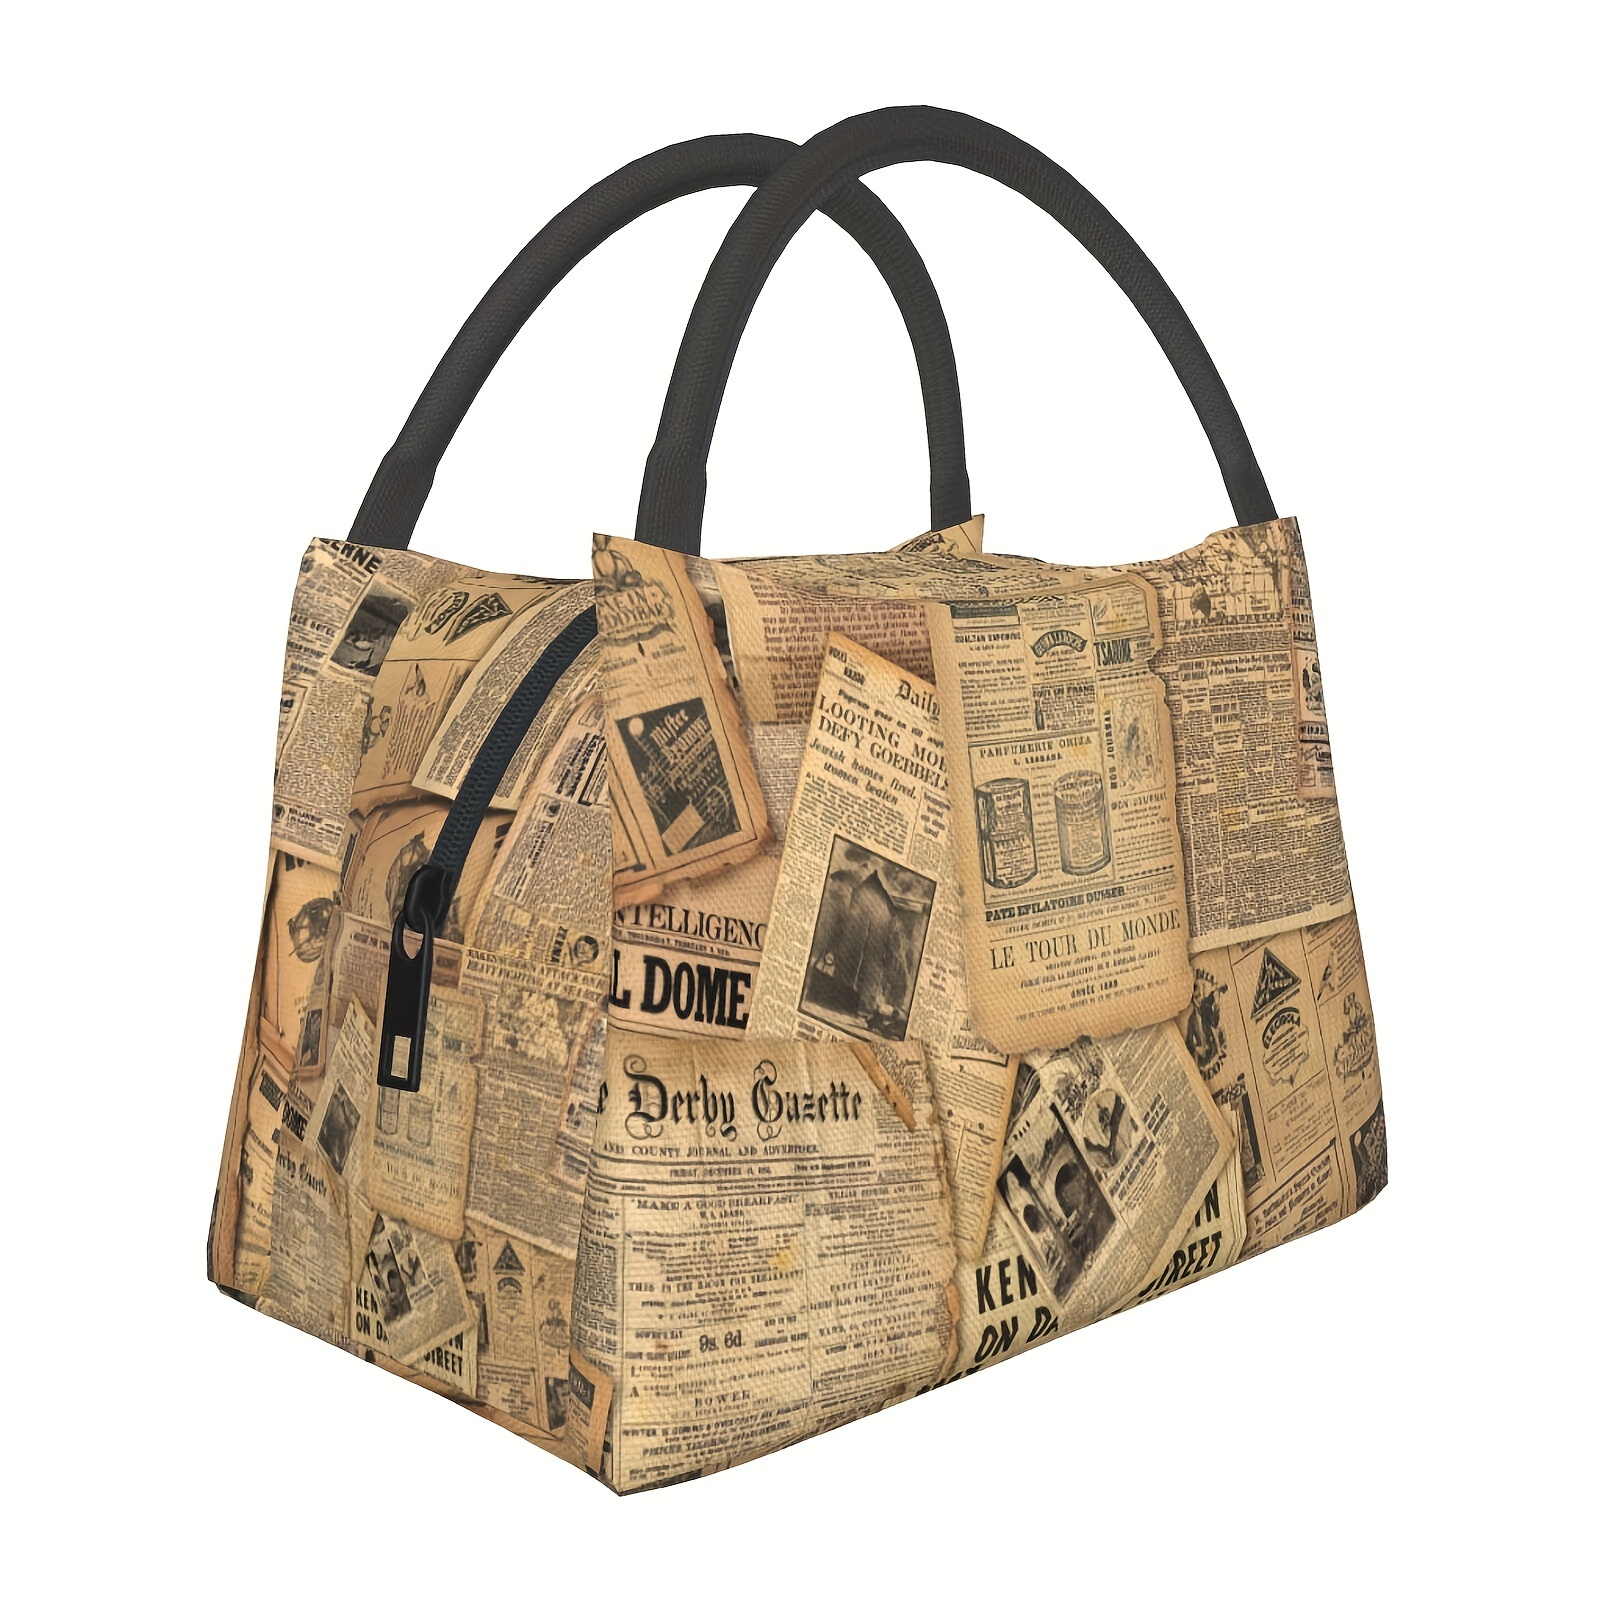 

Vintage Newspaper Insulated Lunch Bag - Reusable, Waterproof Polyester Cooler Tote With Zipper For Office, Travel & Picnics